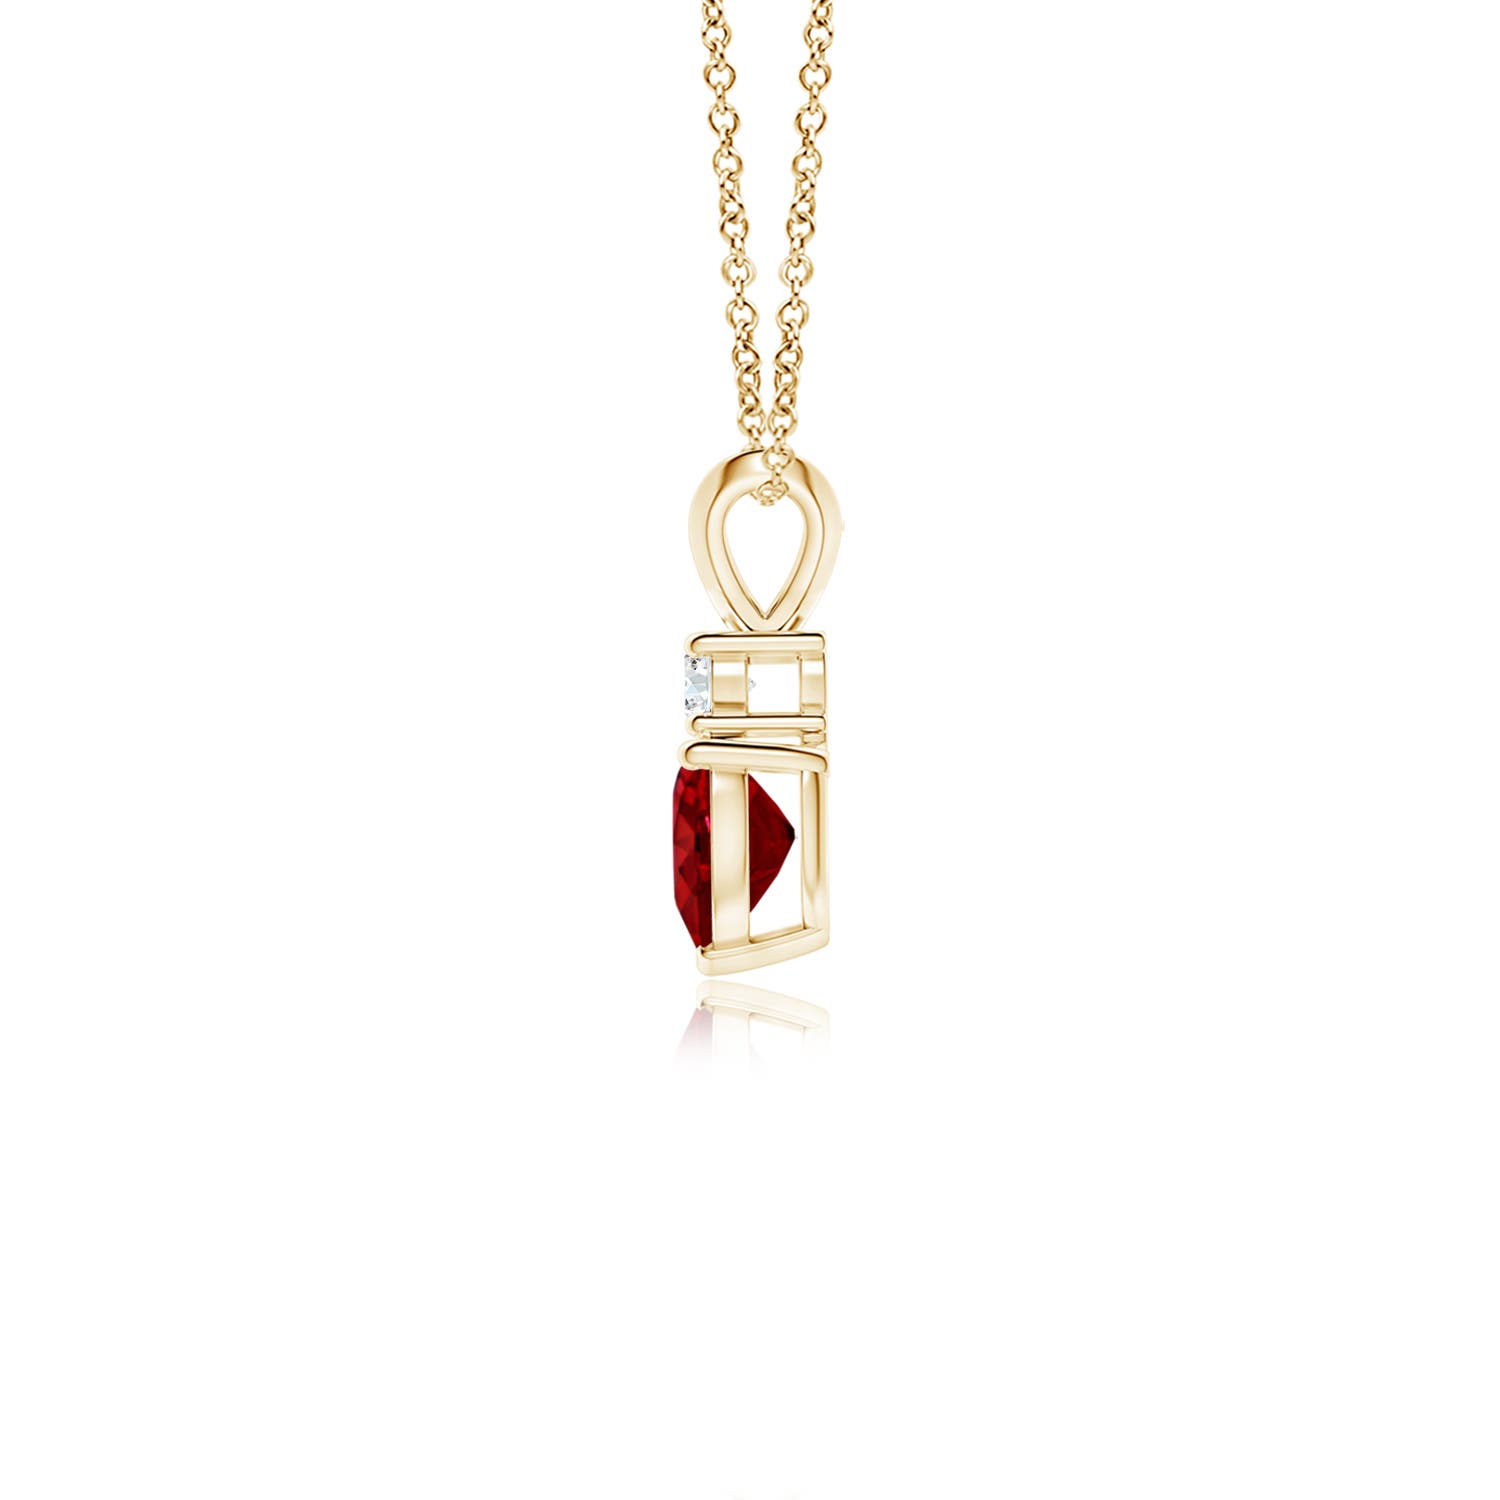 AAAA - Ruby / 0.59 CT / 14 KT Yellow Gold